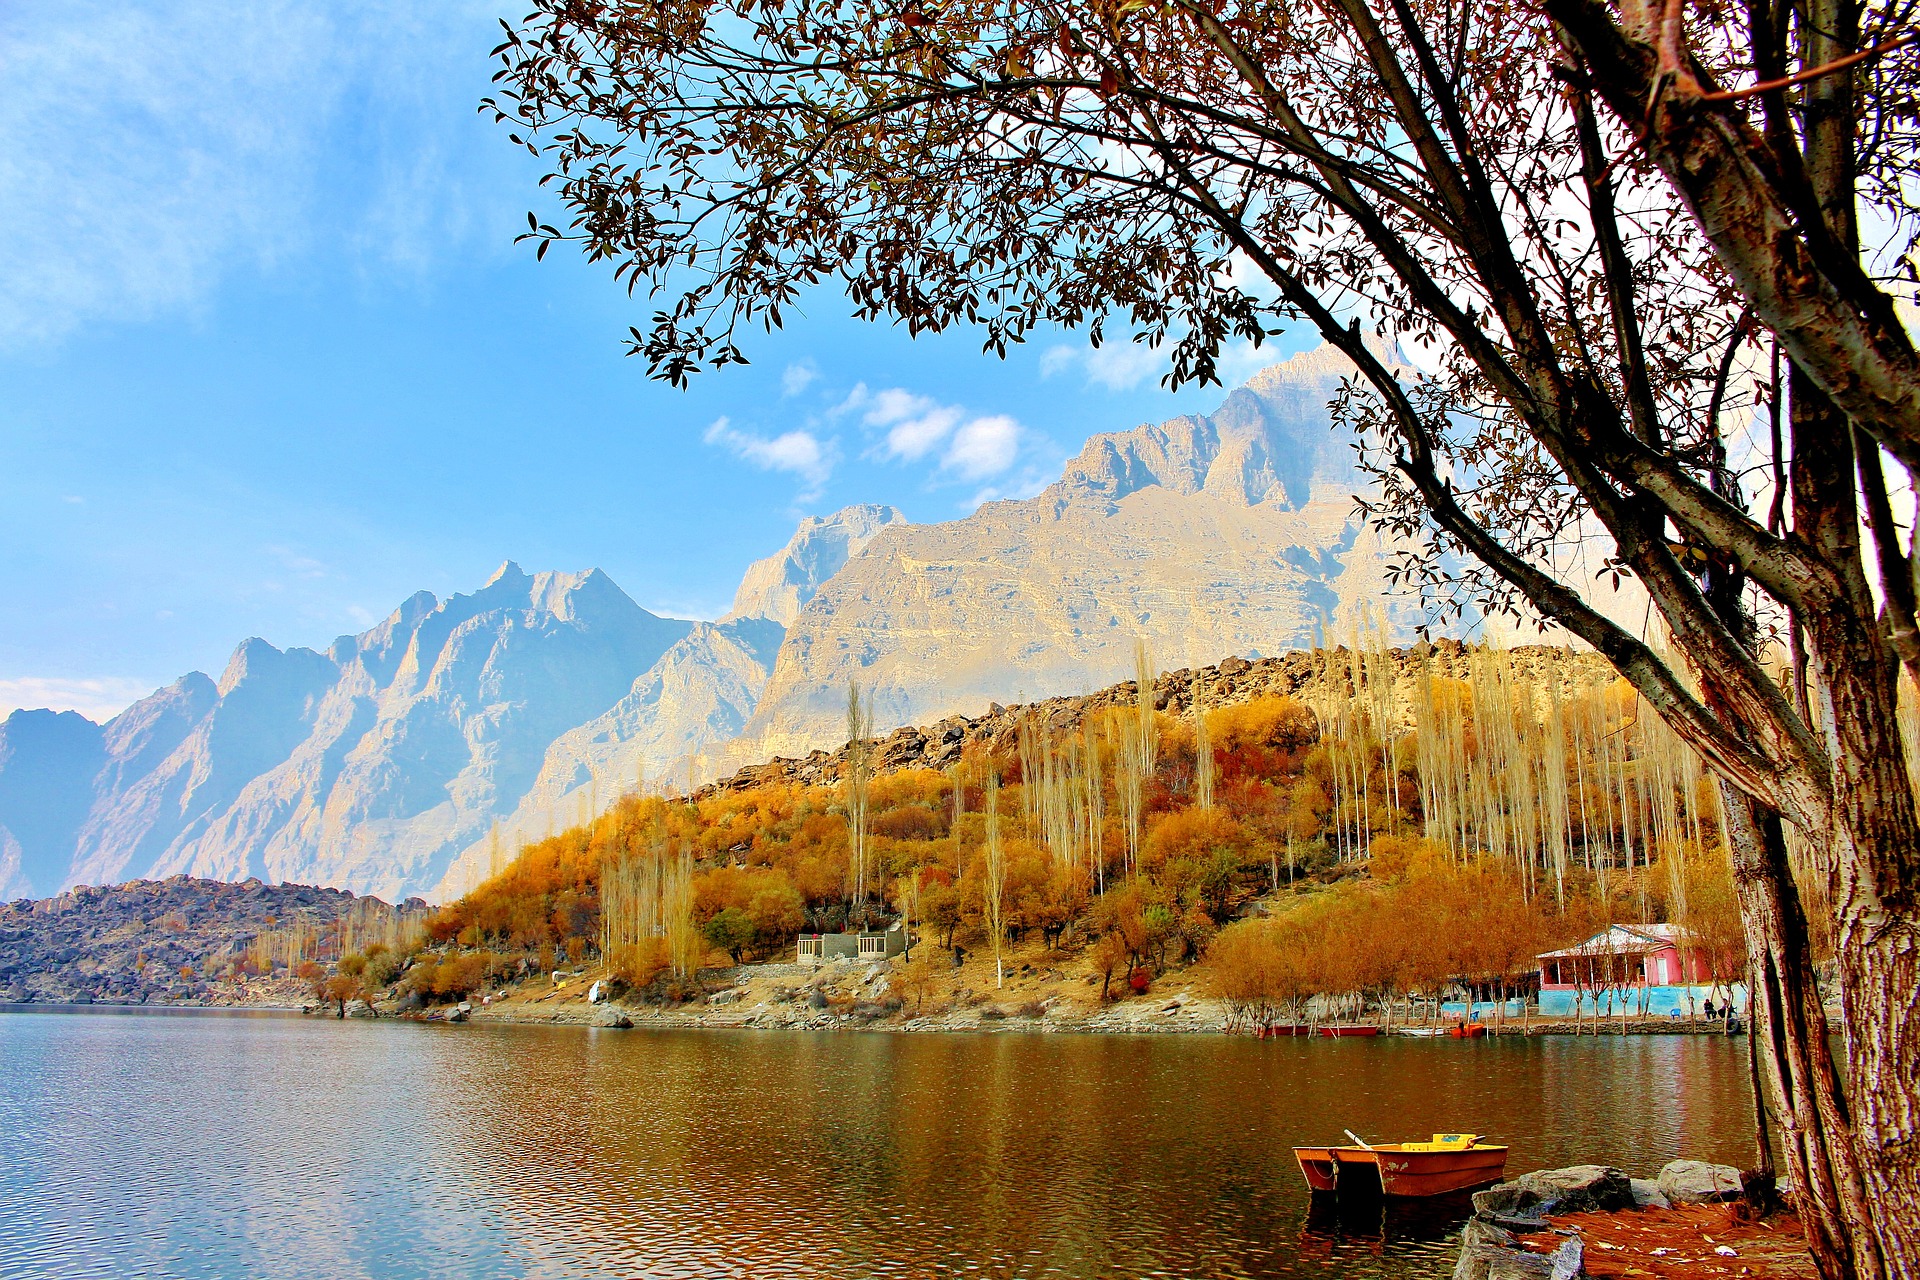 <p>Pakistan is not a very common holiday destination but it is an enchanting country. The average budget per person per day barely reaches 30 dollars with accommodation and food included.</p>